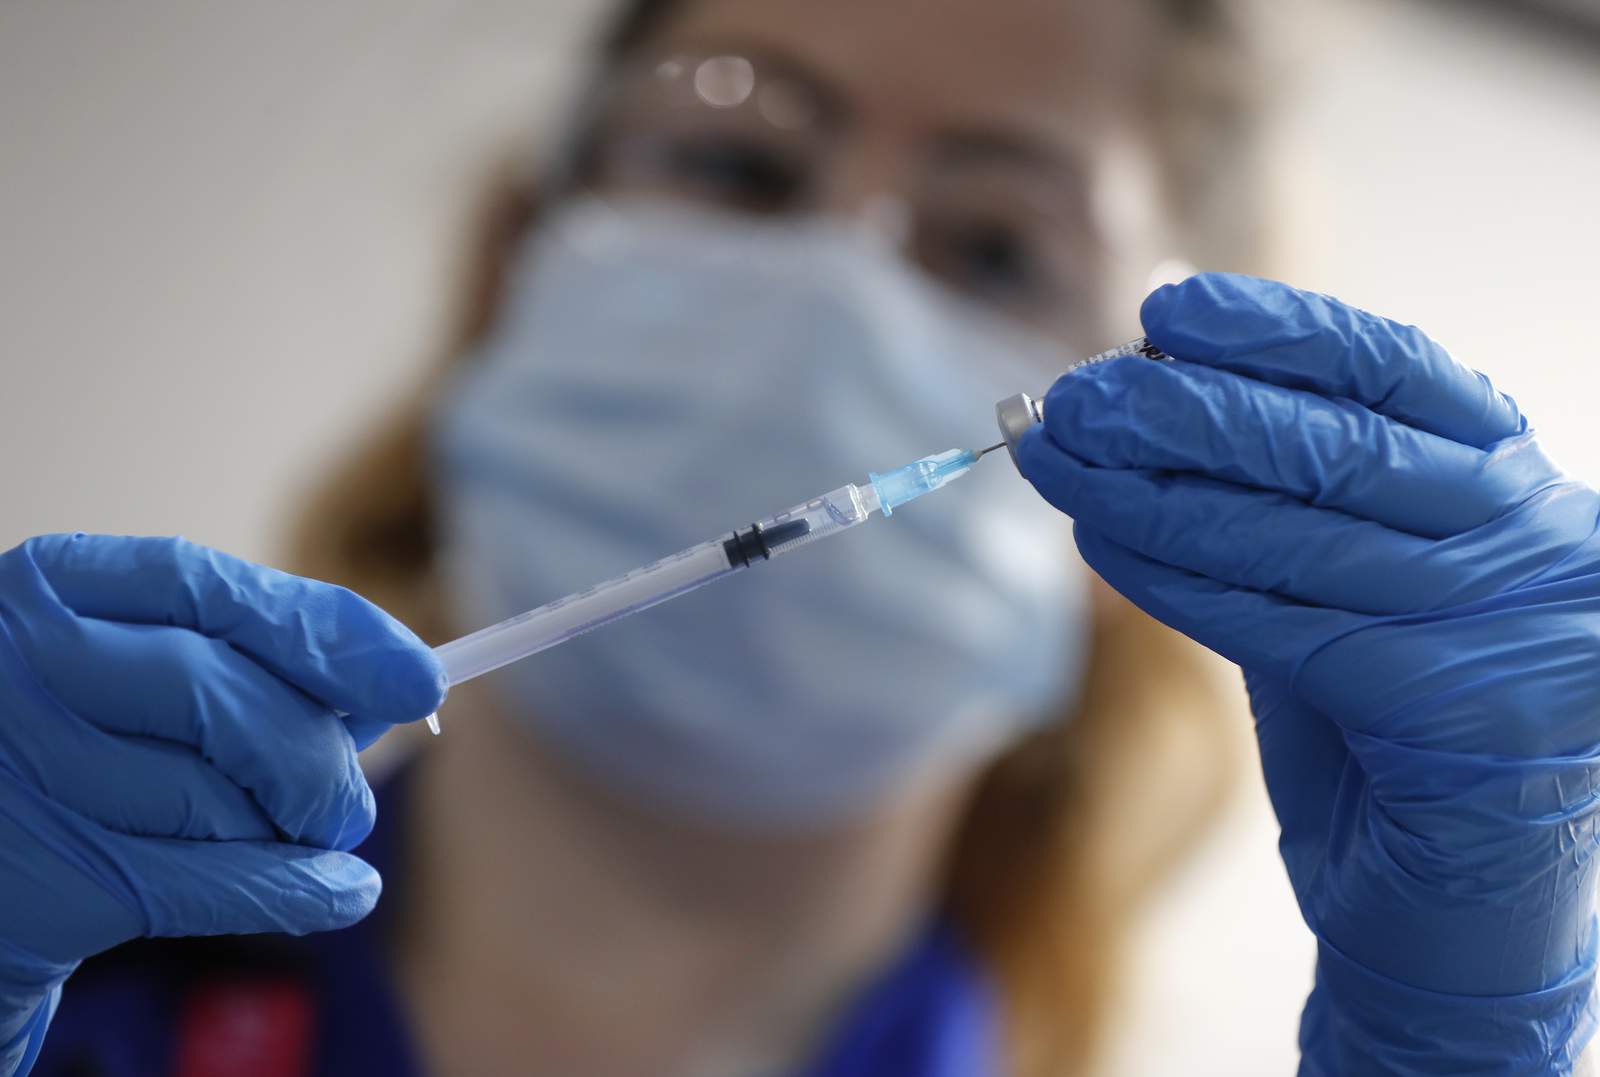 Michigan officials: COVID vaccine to be distributed in 4 phases, prioritize frontline workers